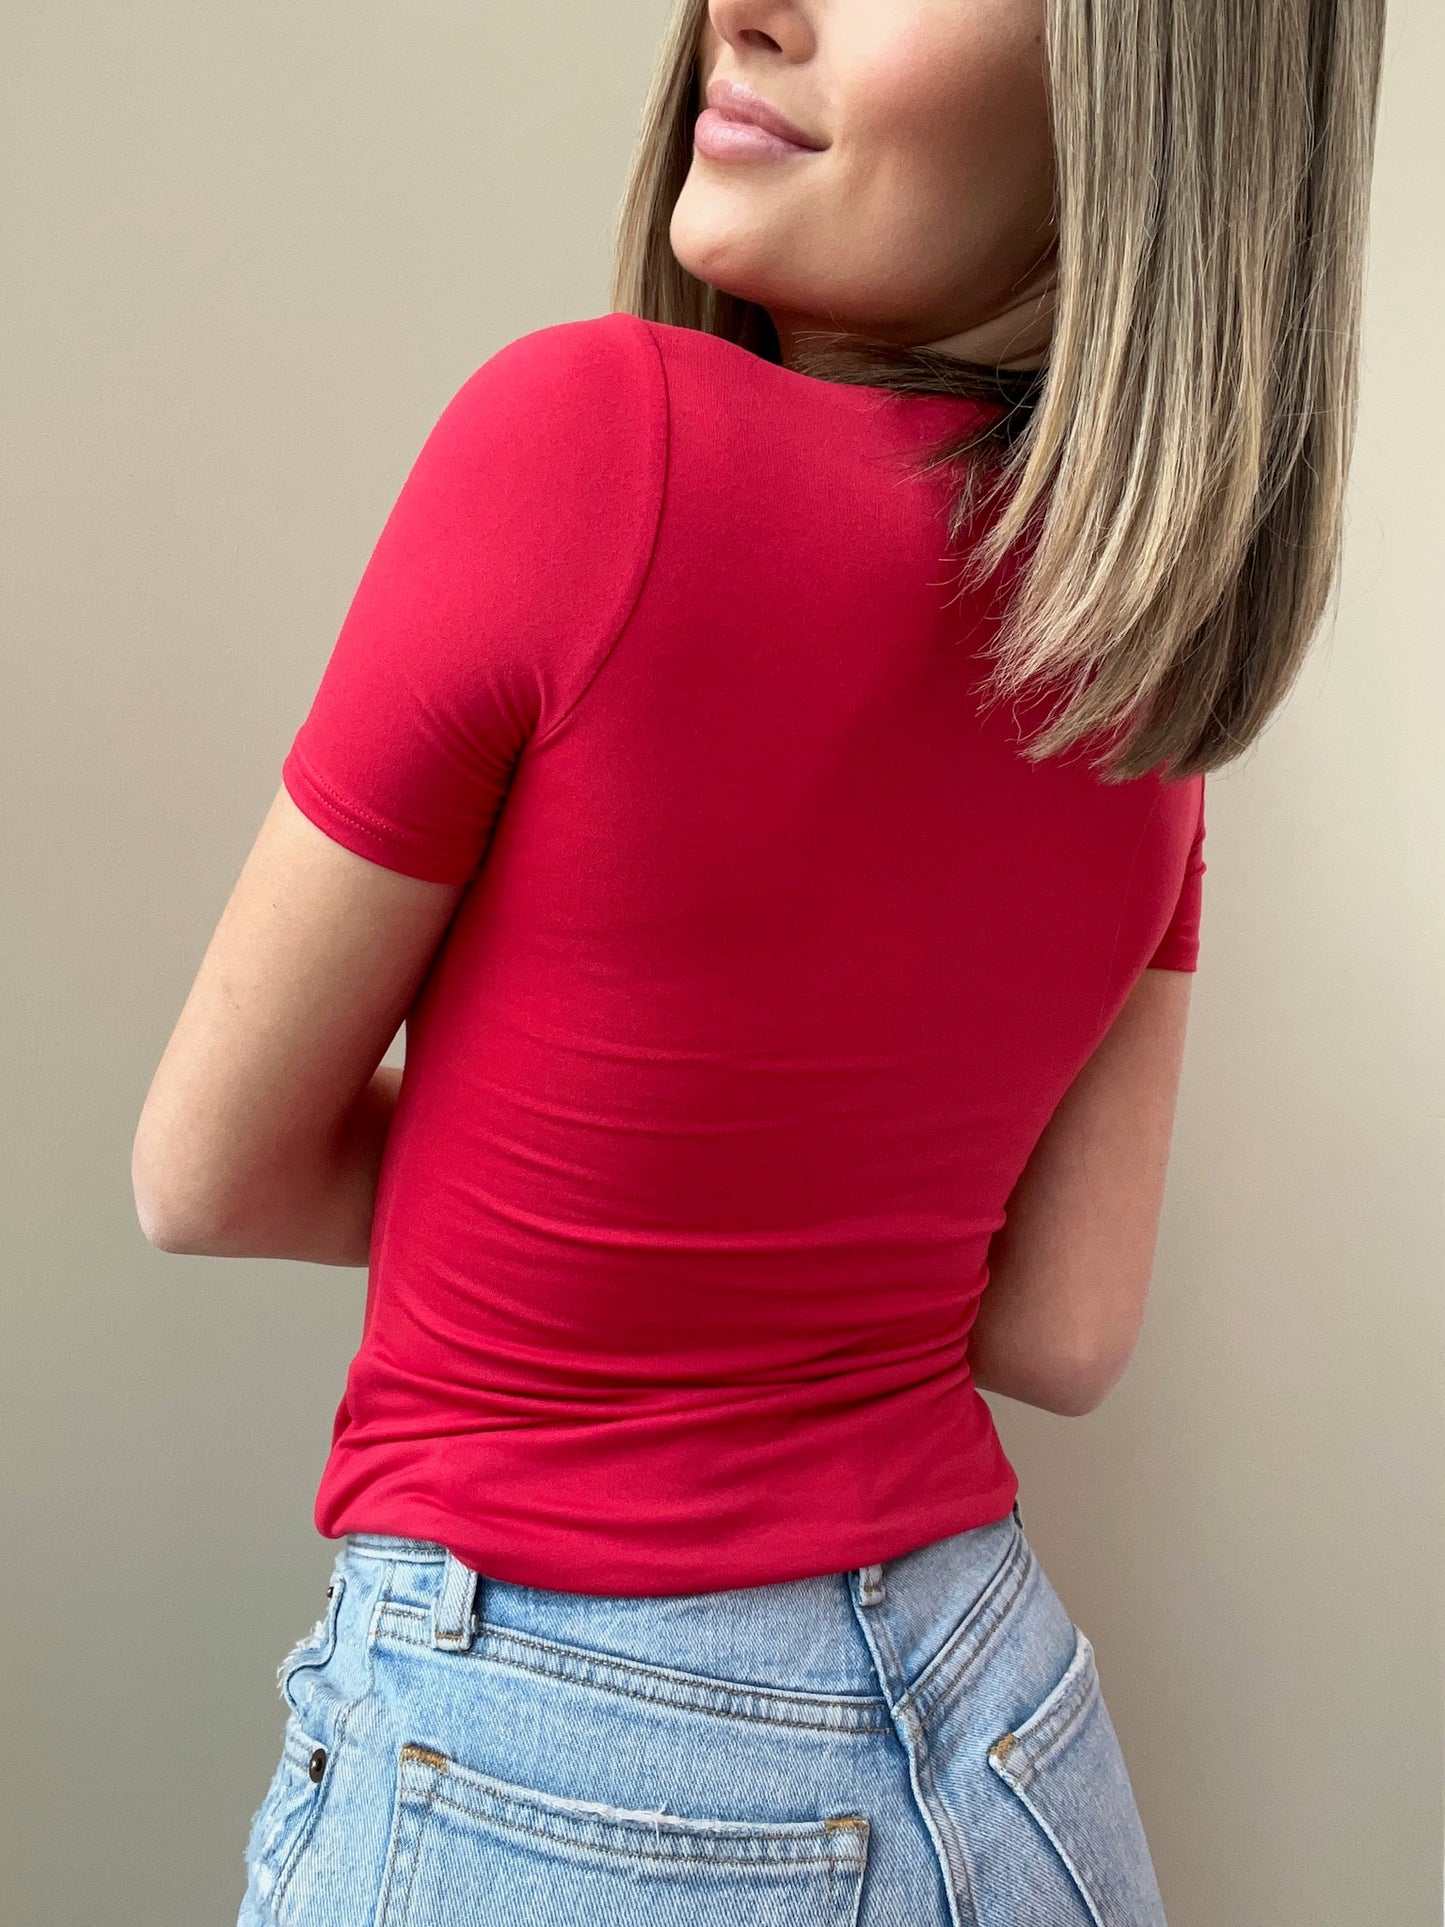 My Fave Top Red